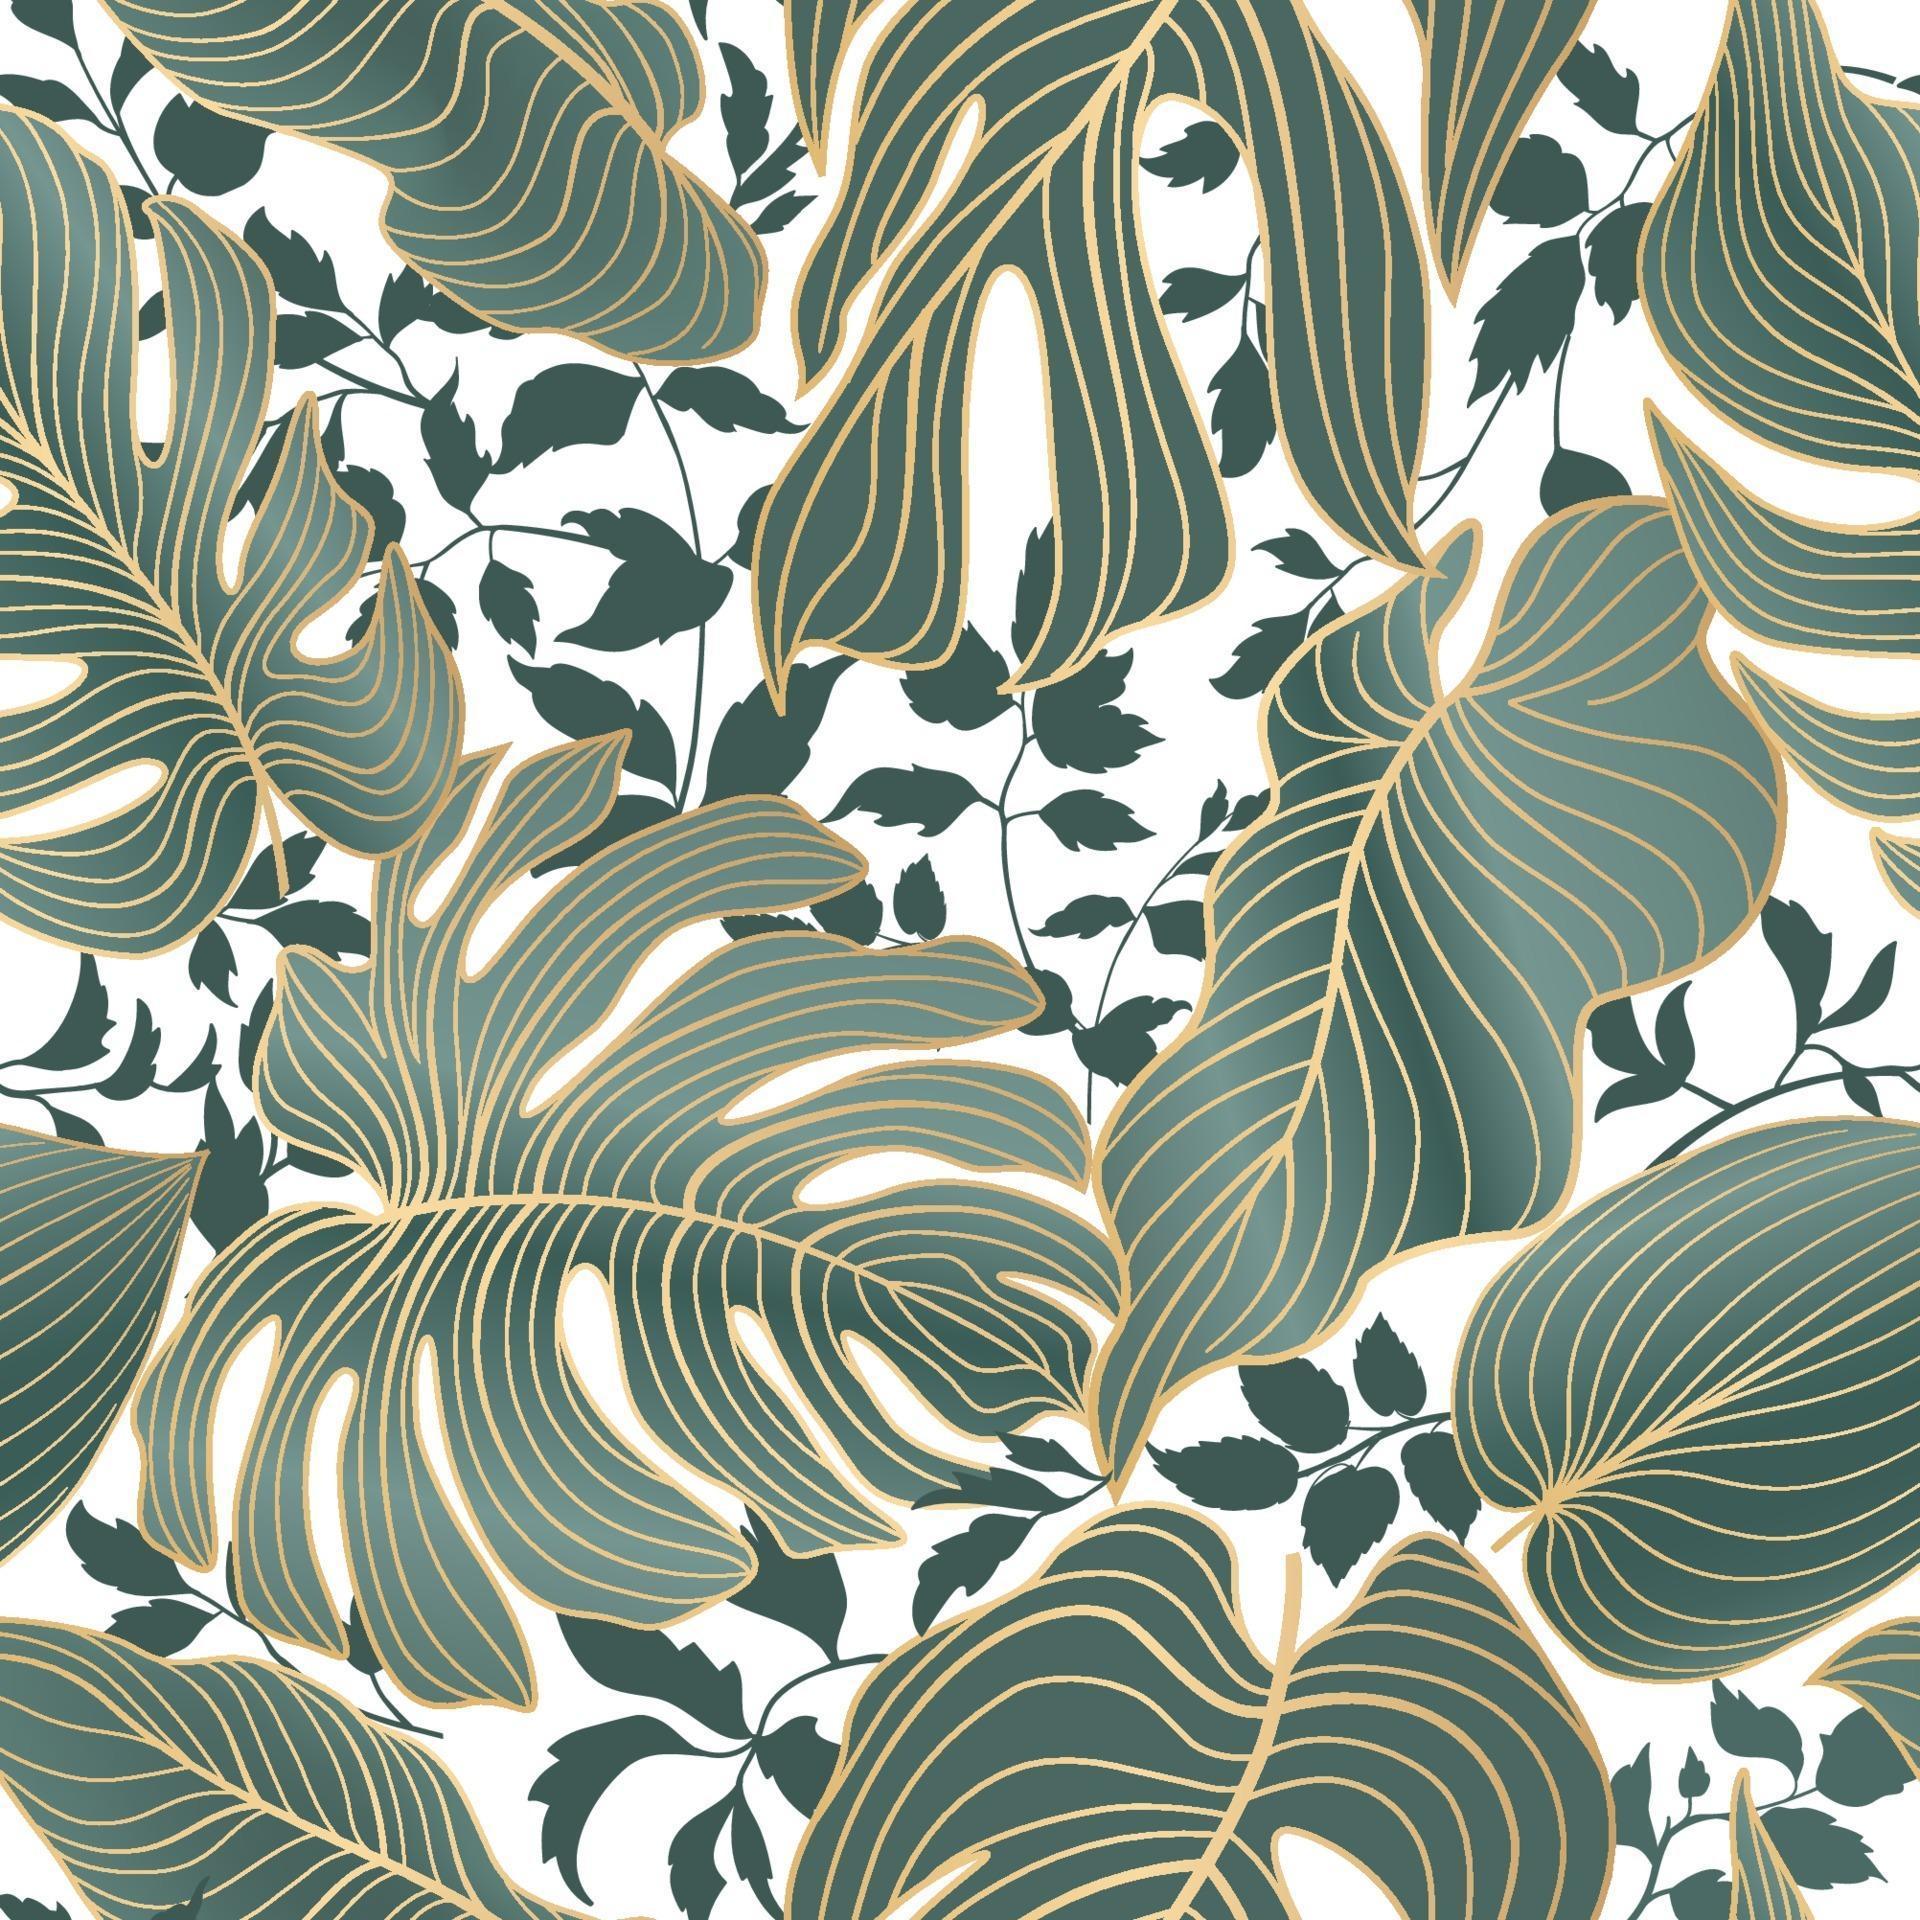 Floral leaves seamless pattern. Foliage garden background. Floral